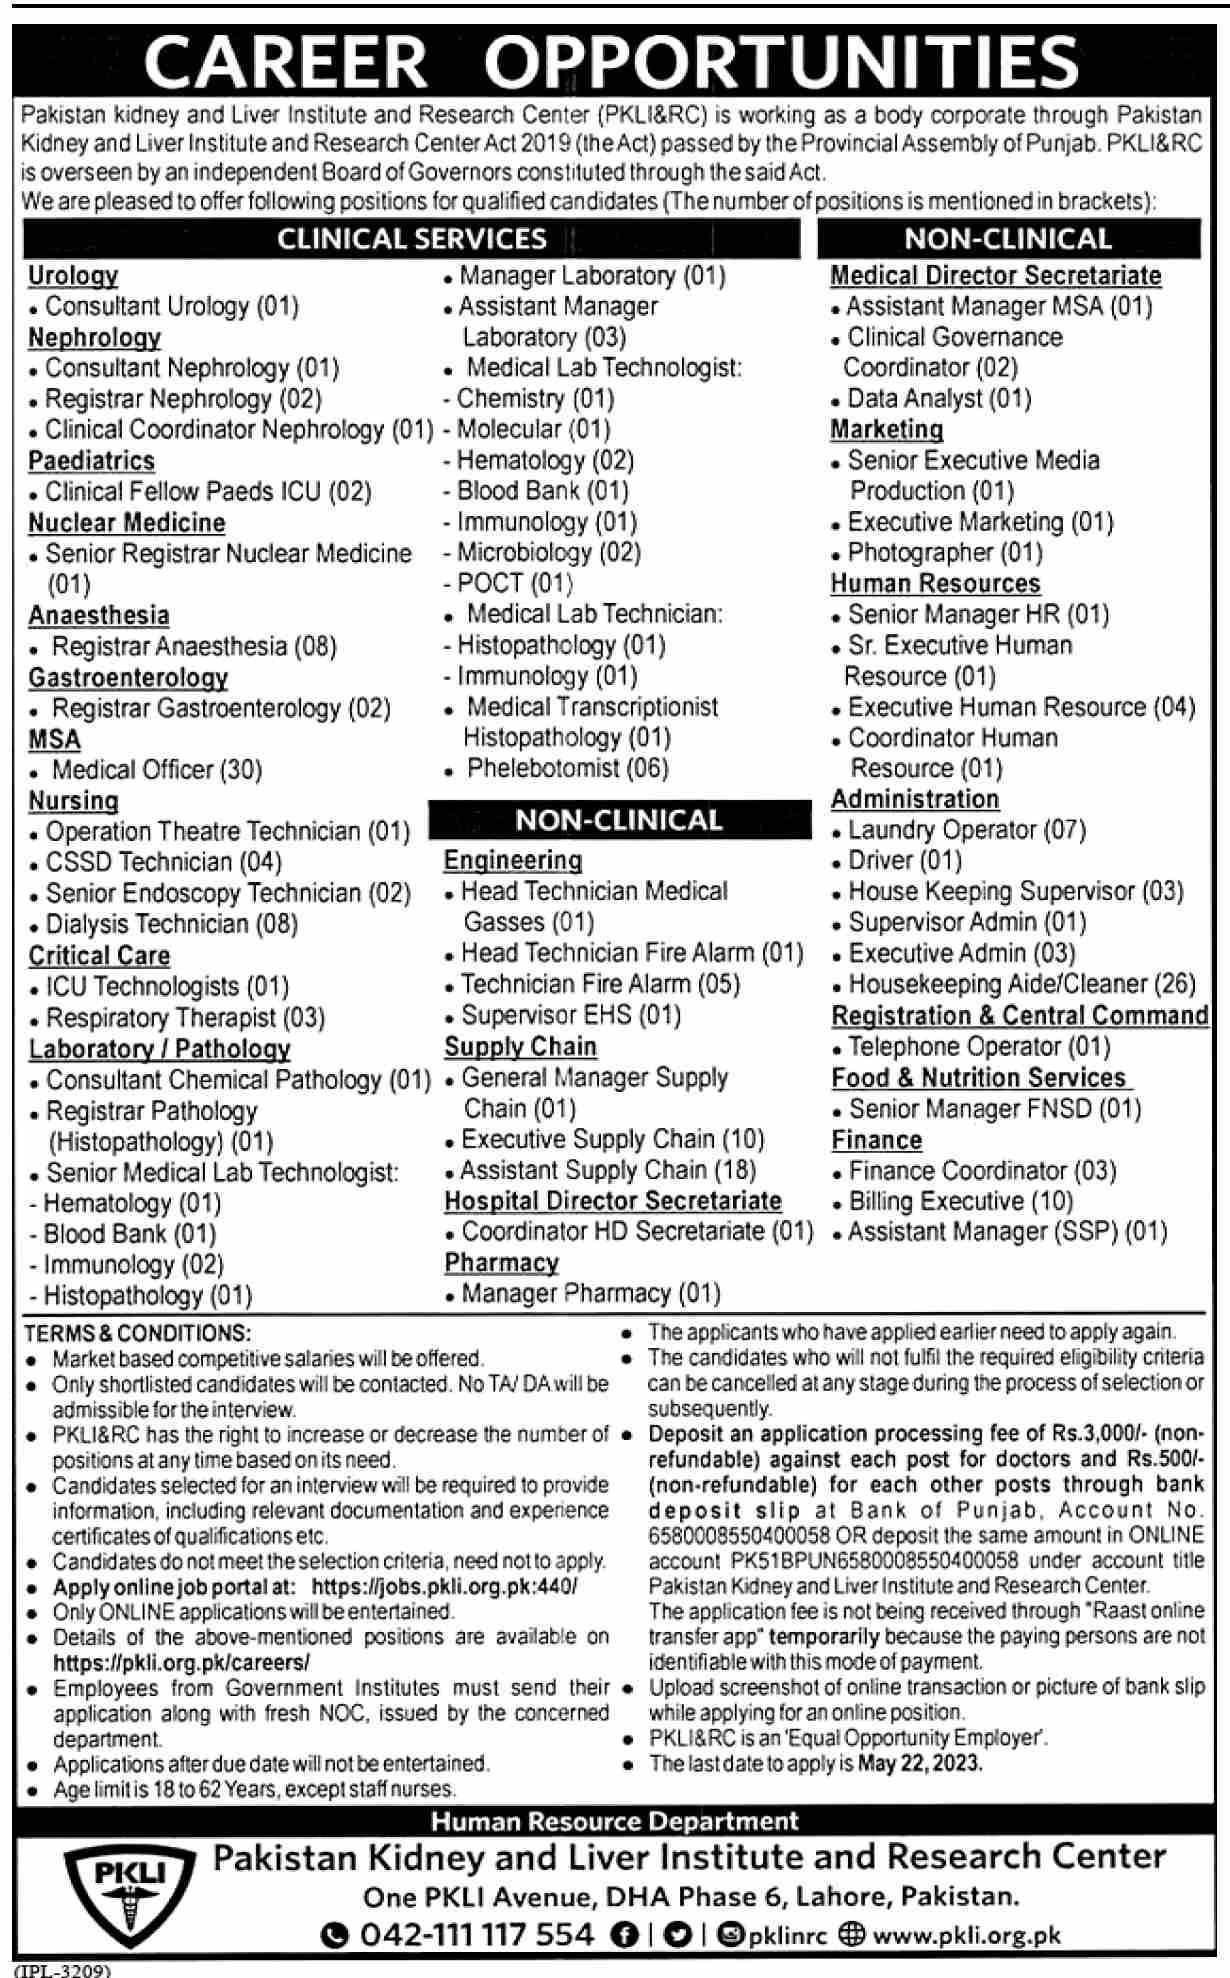 Jobs in Pakistan Kidney And Liver Institute And Research Centre PKLI